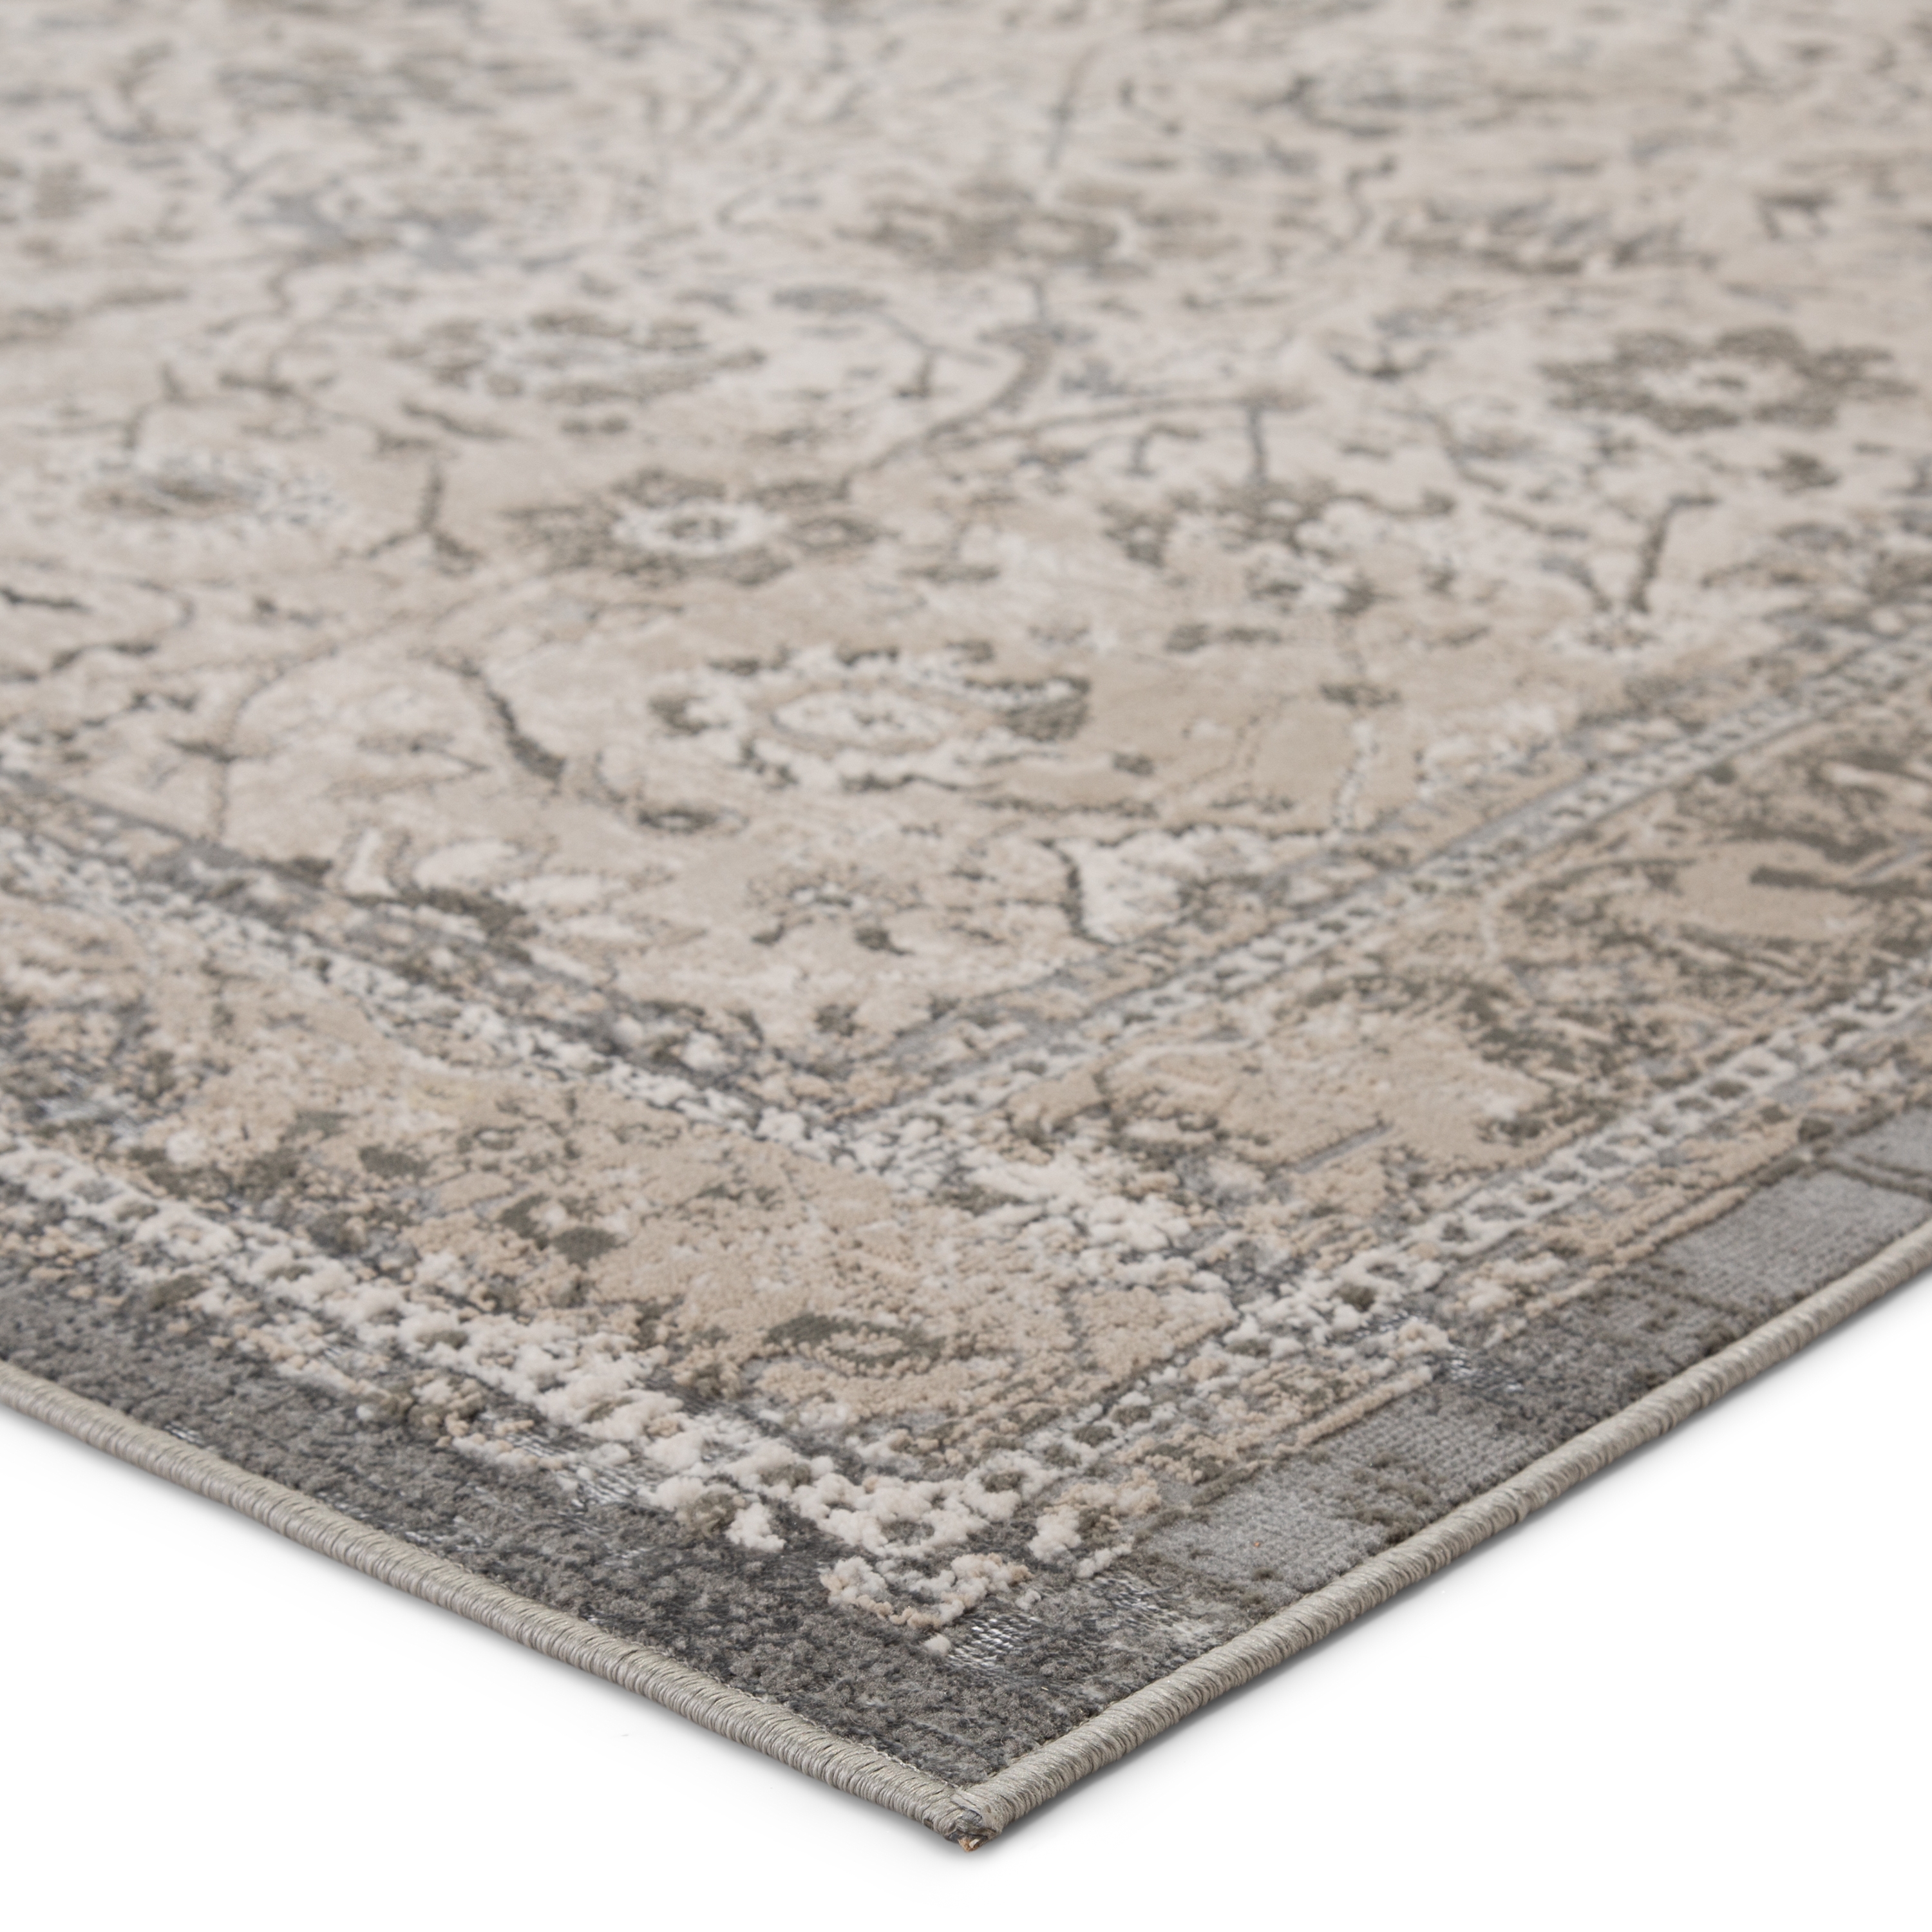 Vibe by Odel Oriental Gray/ White Area Rug (6'7"X9'6") - Image 1